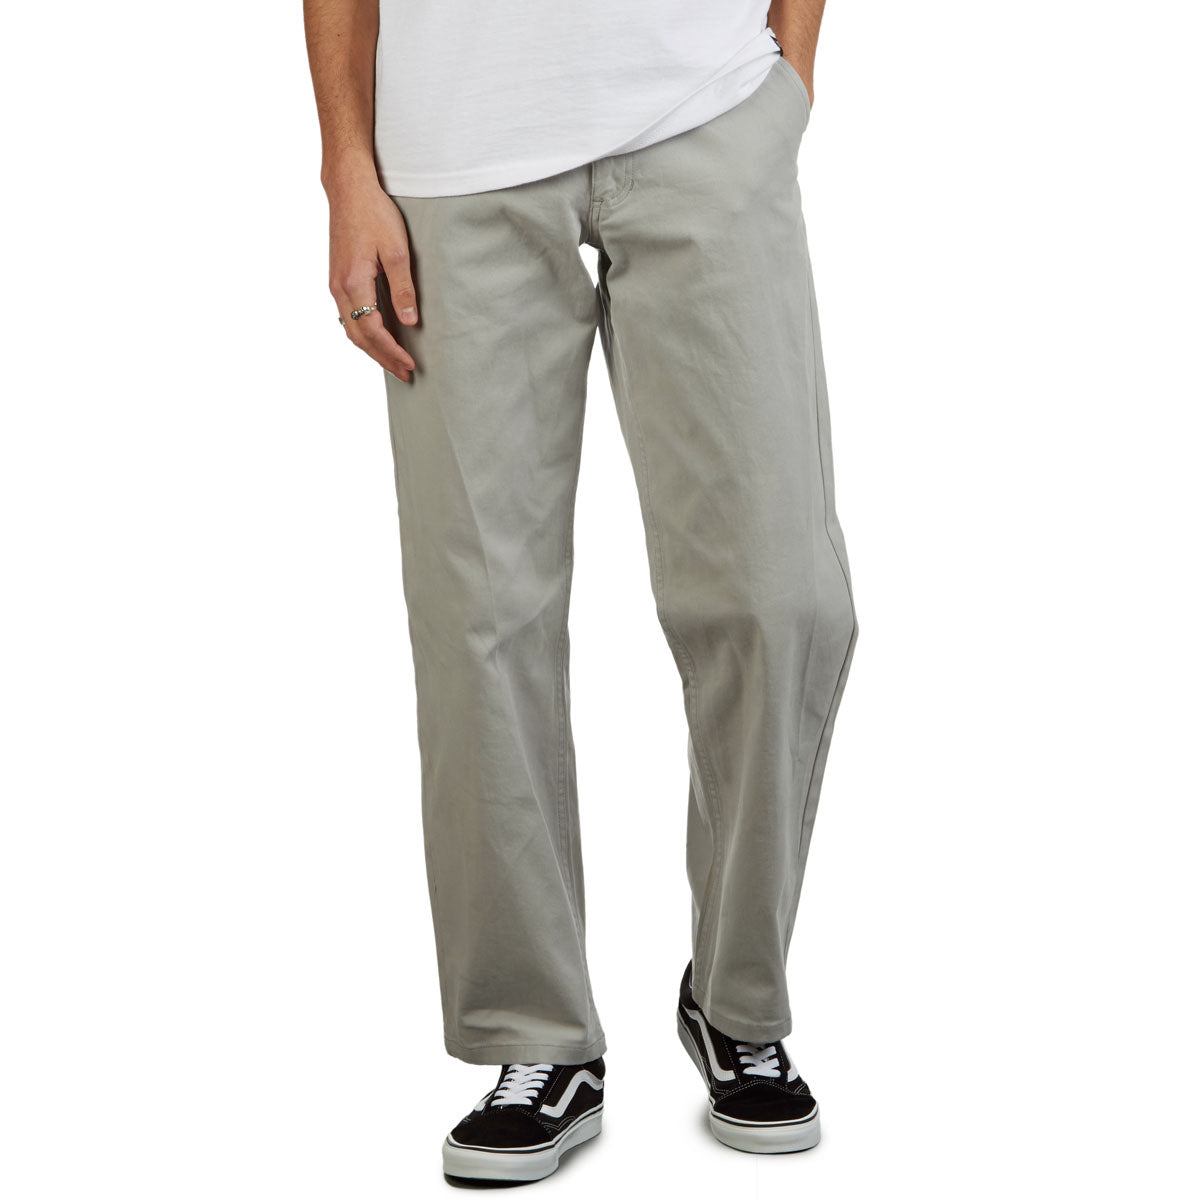 CCS Standard Plus Relaxed Chino Pants - Dove Grey image 1